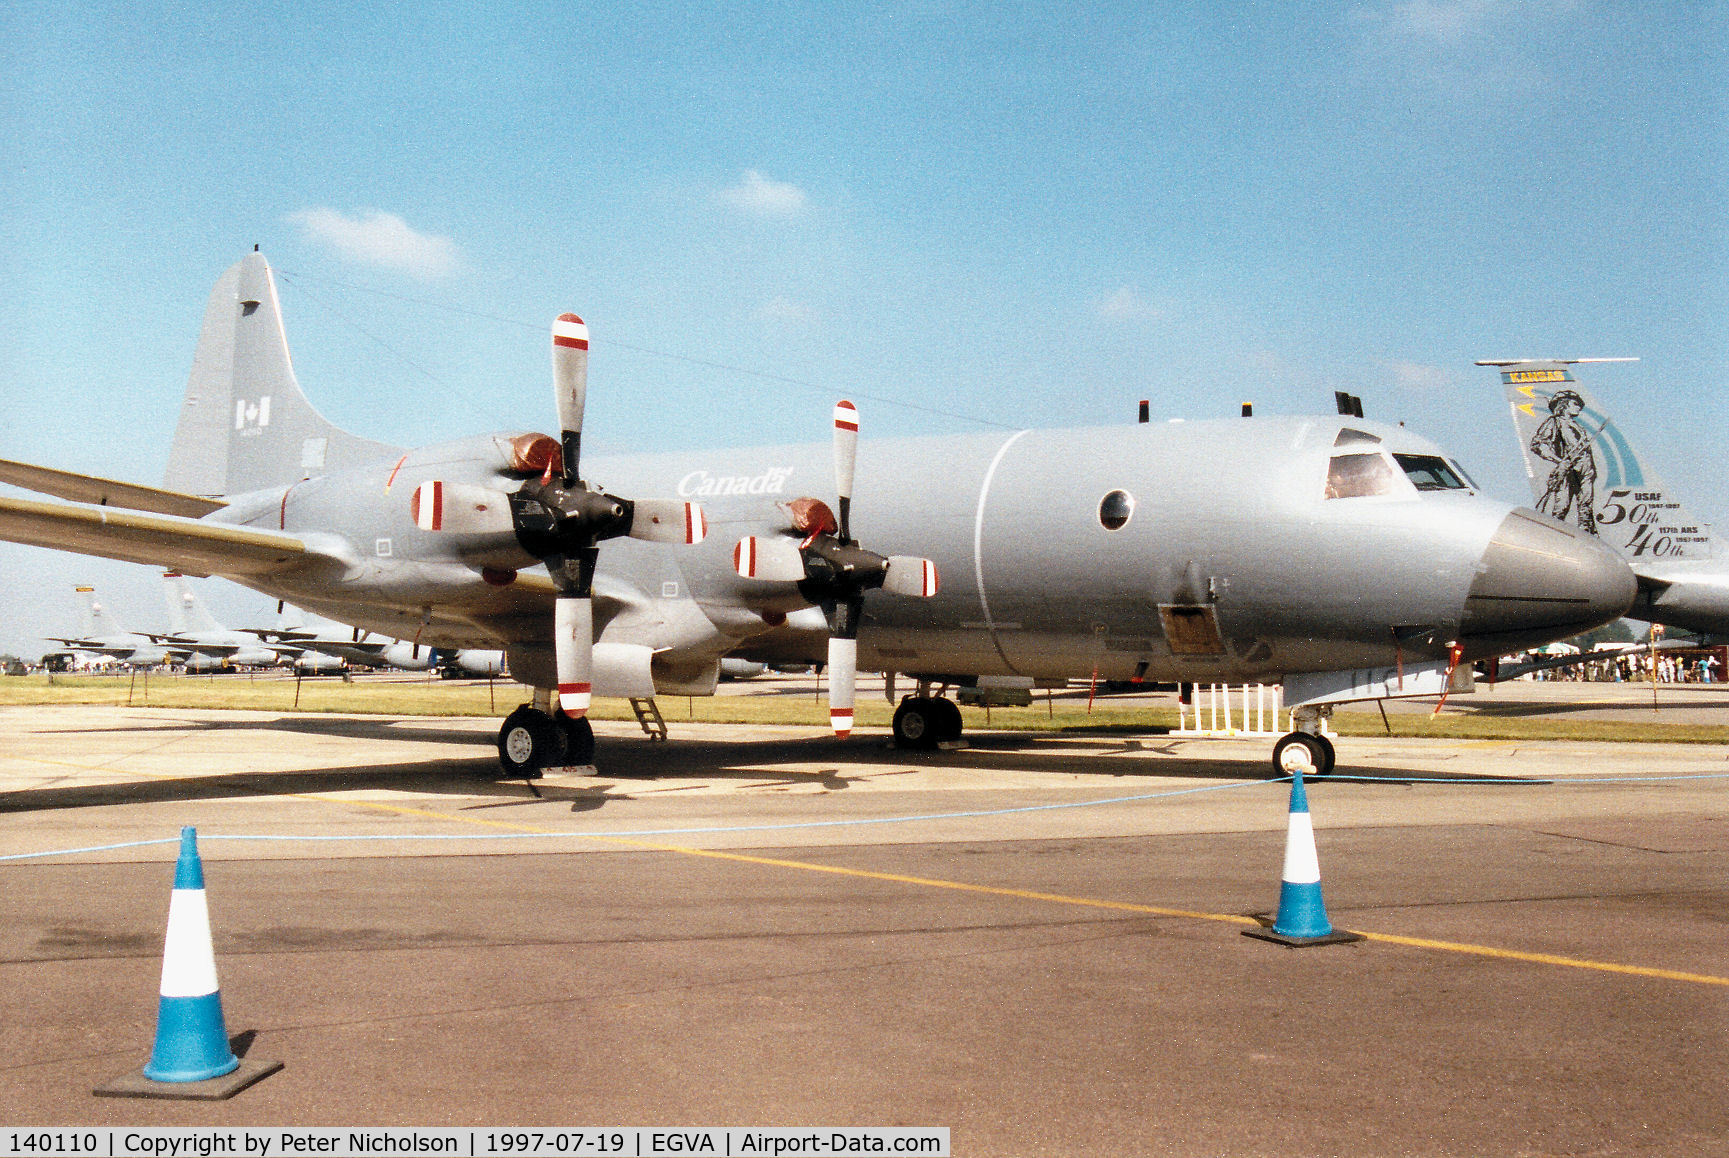 140110, 1980 Lockheed CP-140 Aurora C/N 285B-5712, CP-140 Aurora,  callsign Canforce 110, of 415 Squadron Canadian Armed Forces on displayat the 1997 Intnl Air Tattoo at RAF Fairford.